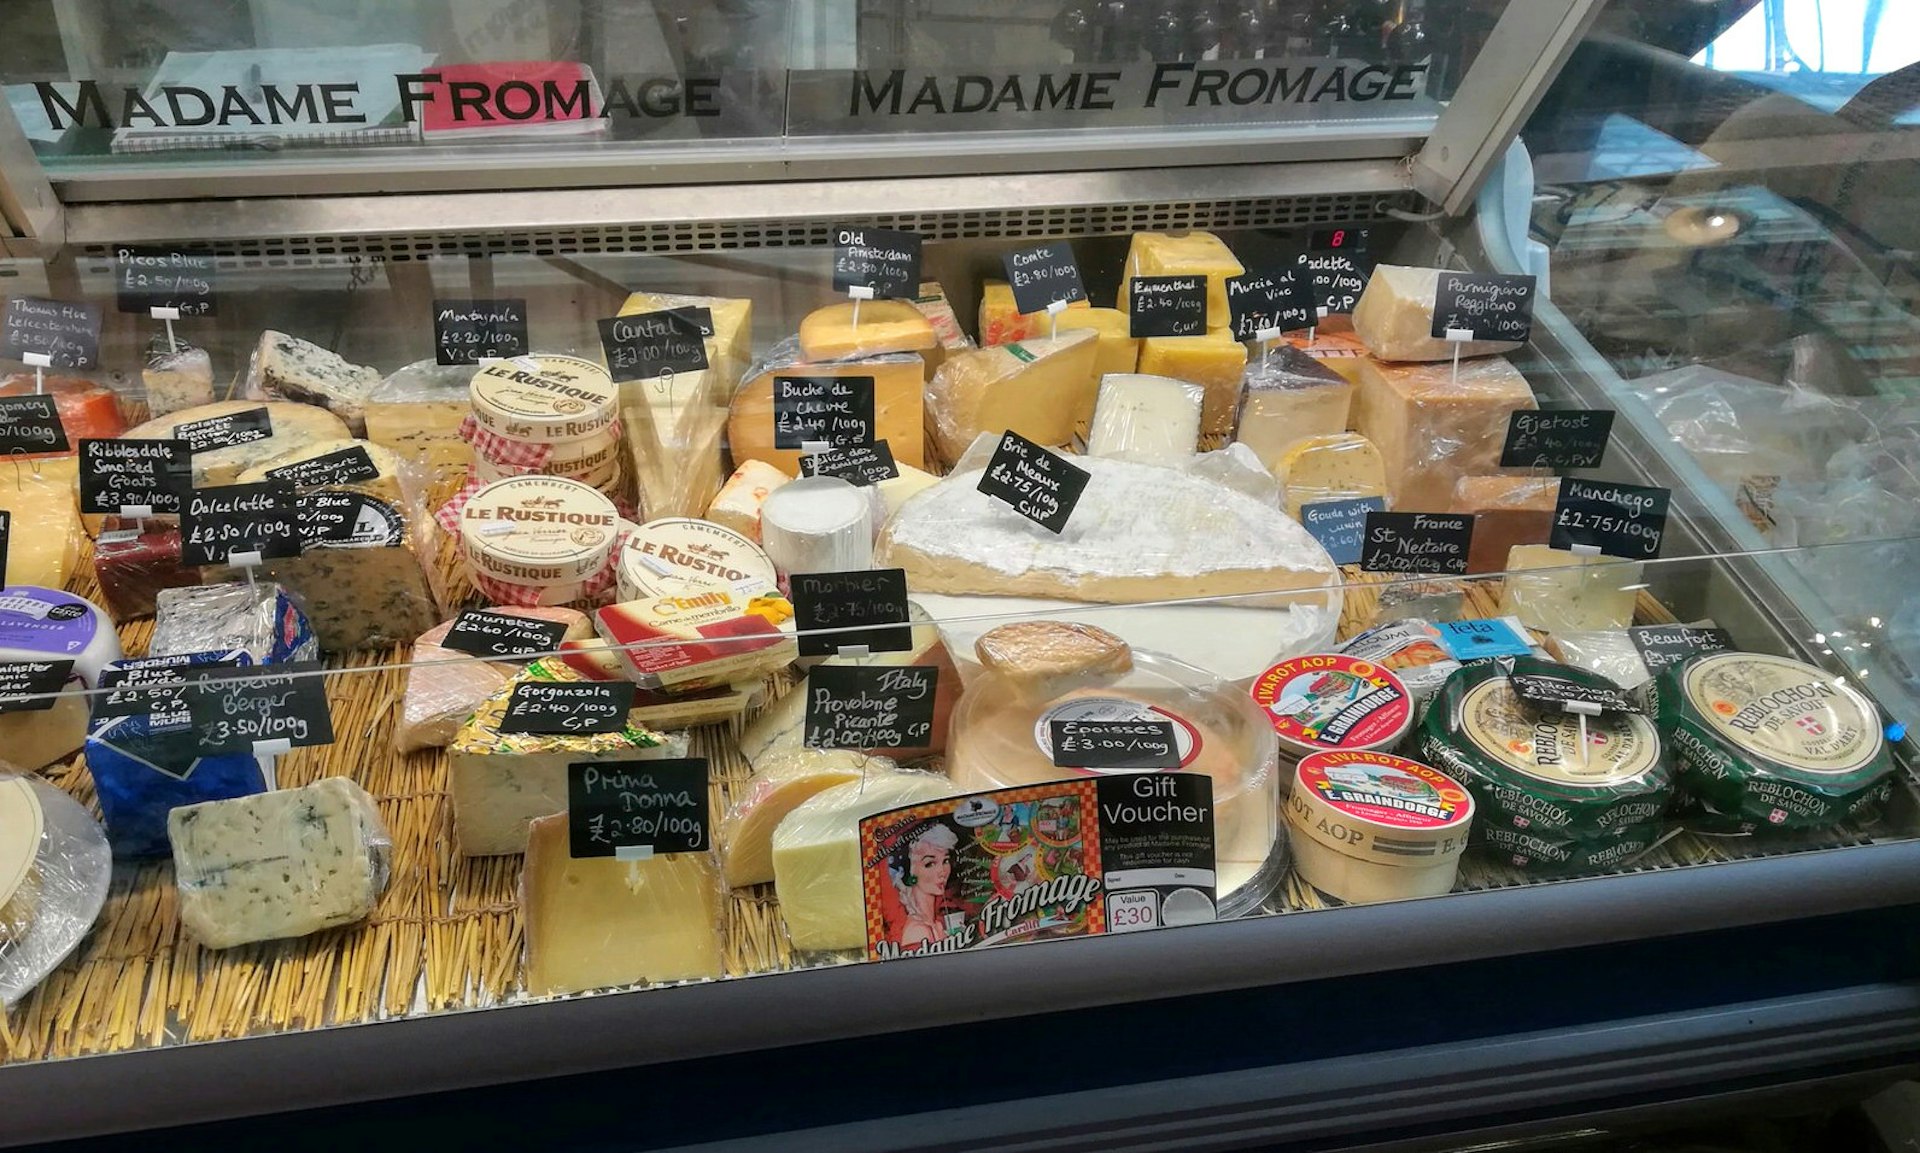 Madame Fromage in Cardiff Market